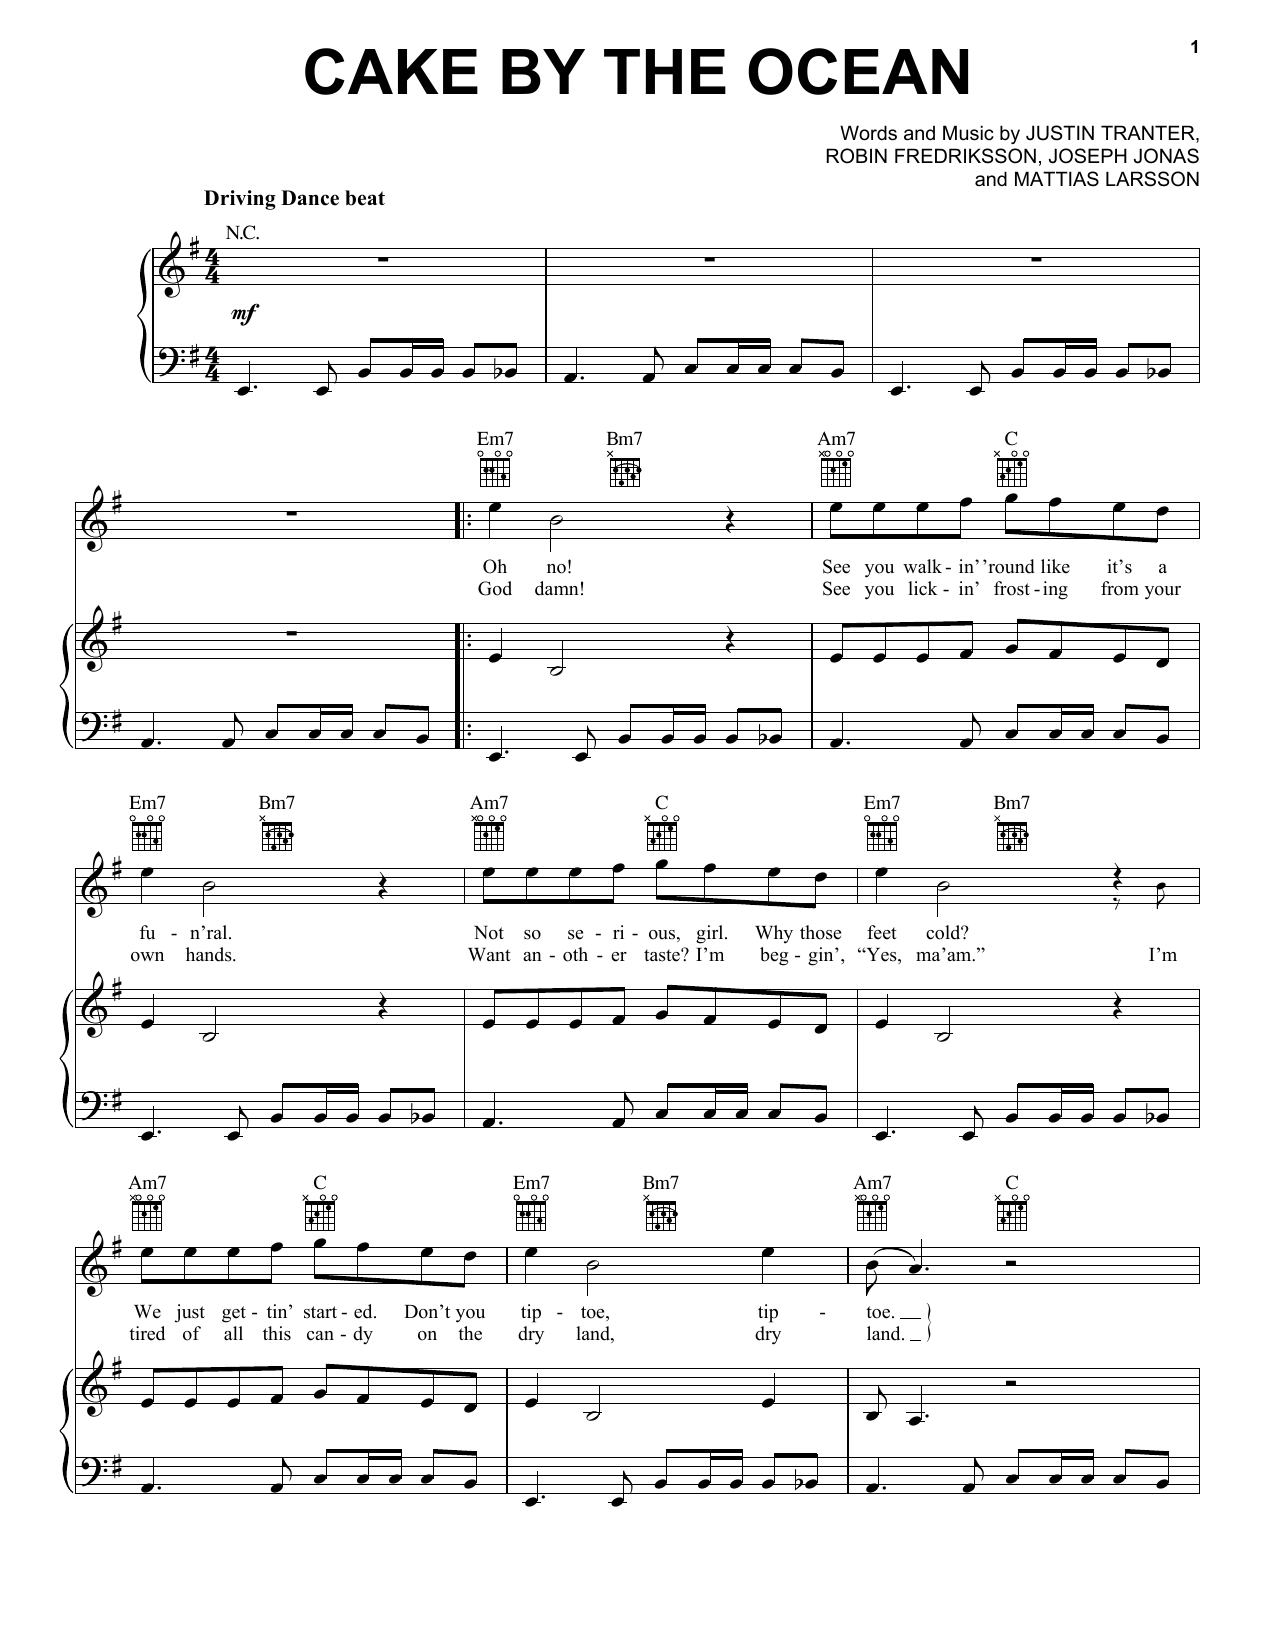 Download DNCE Cake By The Ocean Sheet Music